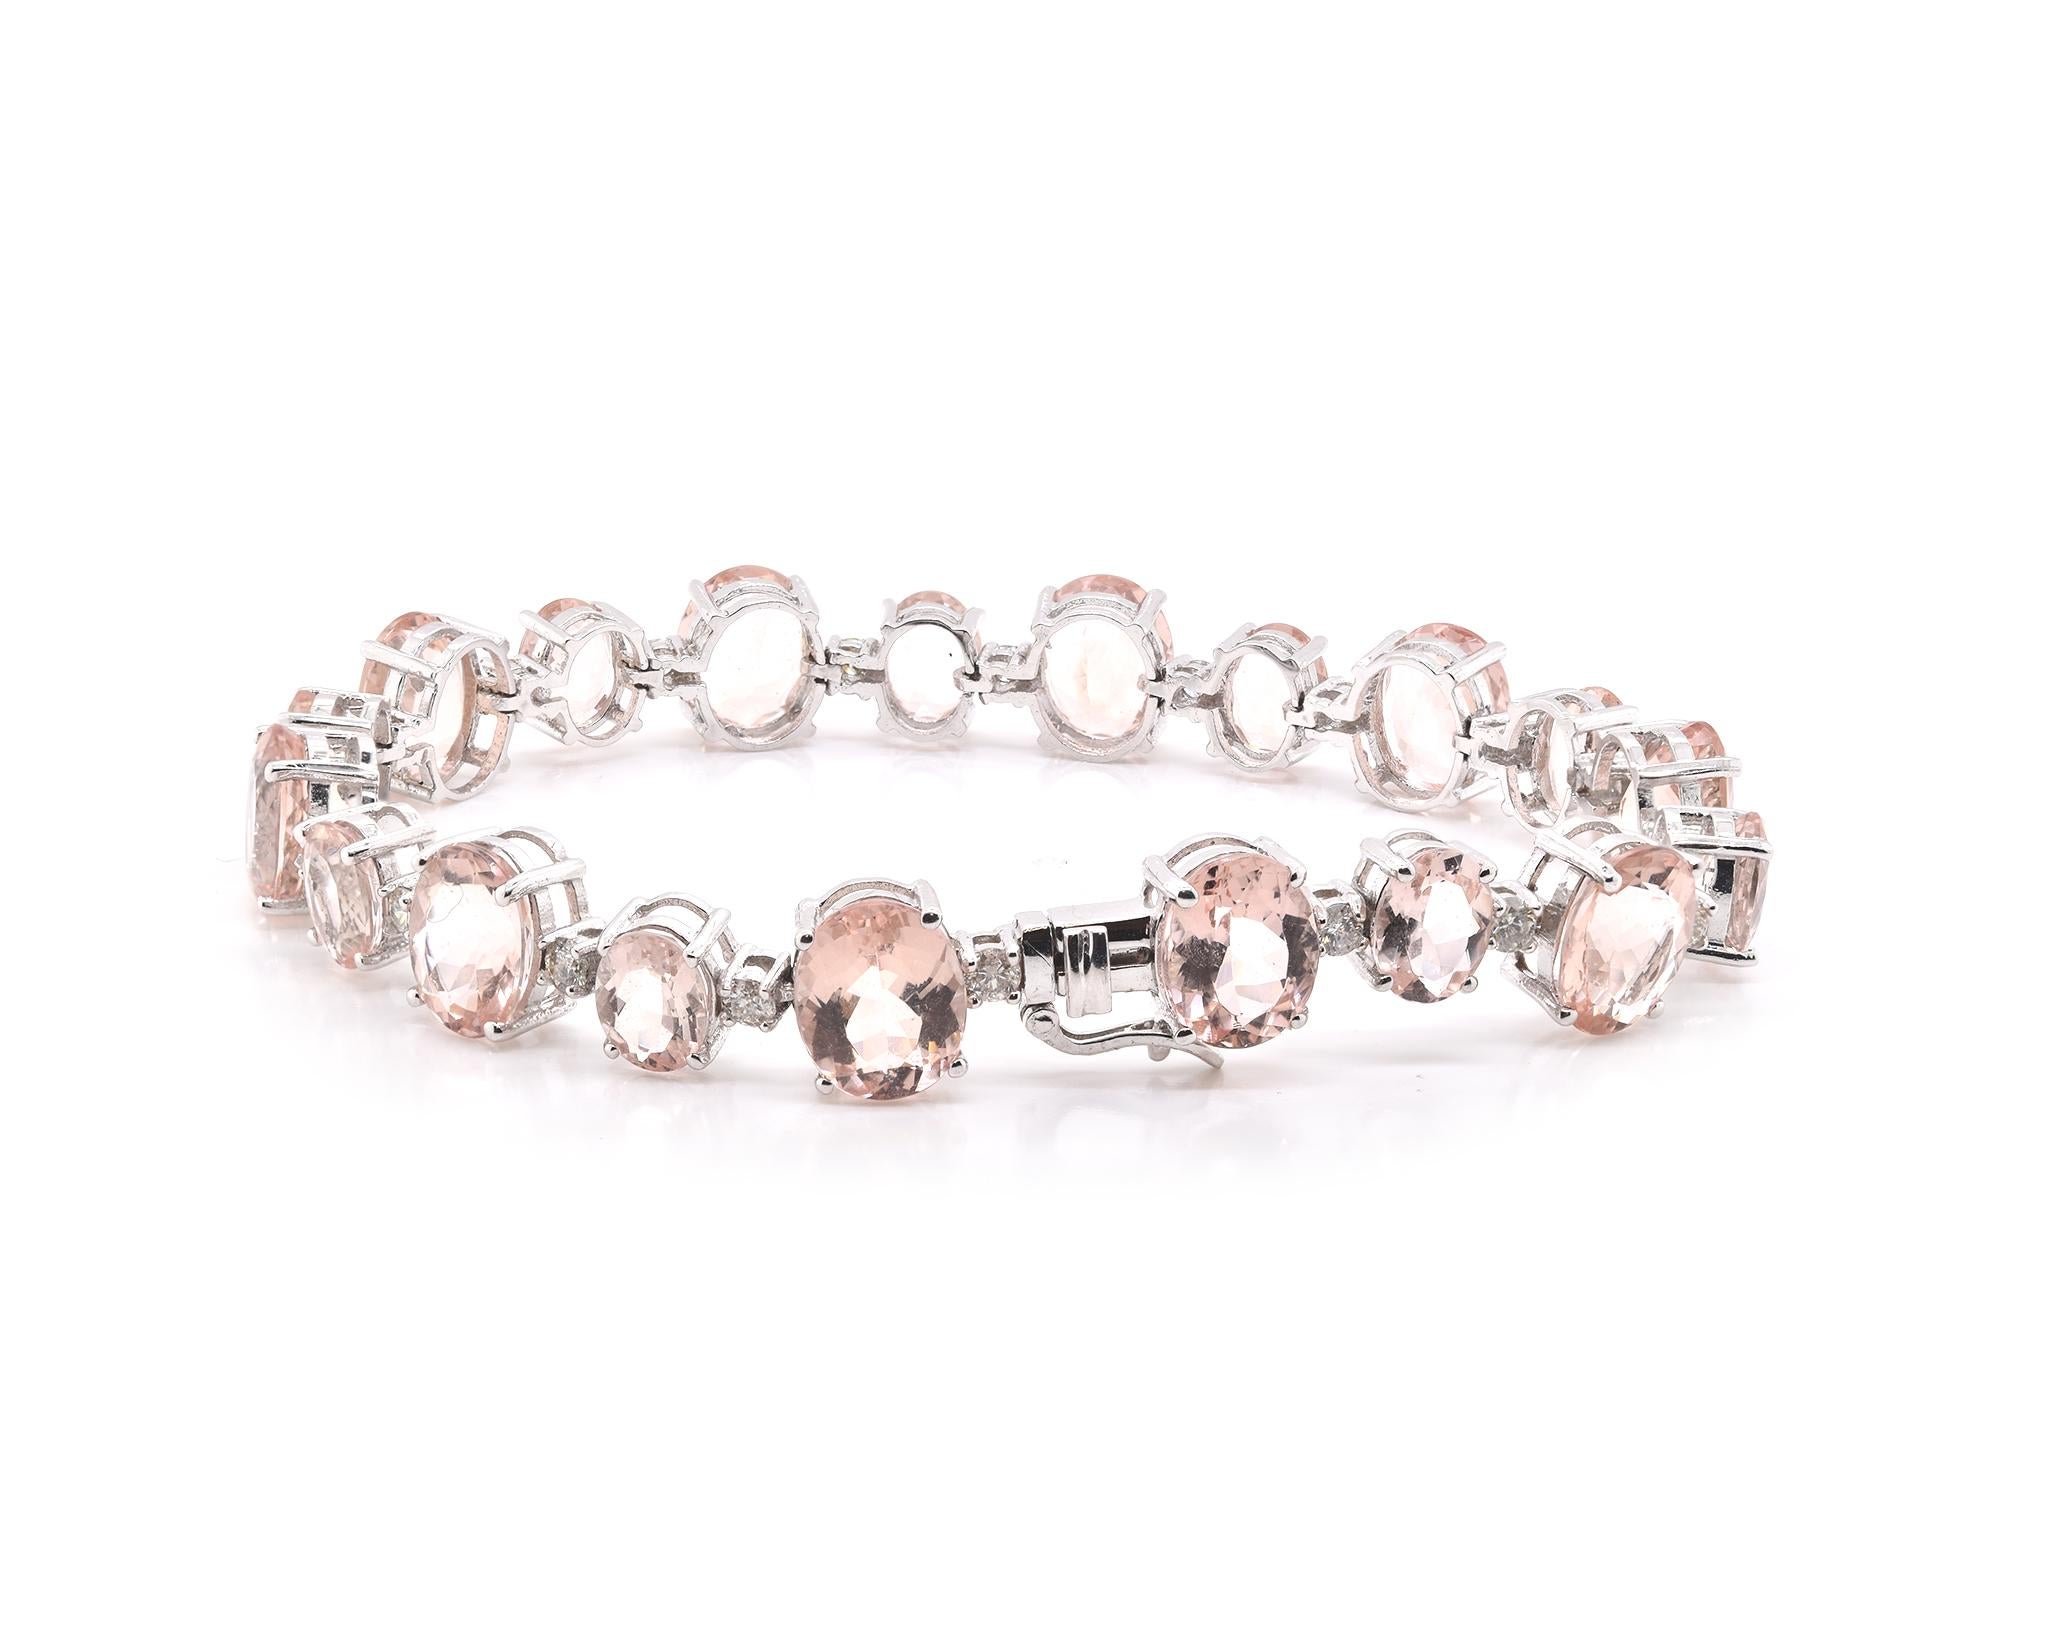 Designer: custom
Material: 14K white gold
Morganite: 19 oval cut = 34.44cttw
Diamond: 19 round brilliant cut = 1.33cttw
Color: G
Clarity: SI1
Dimensions: bracelet measures 7-inches
Weight: 23.38 grams
